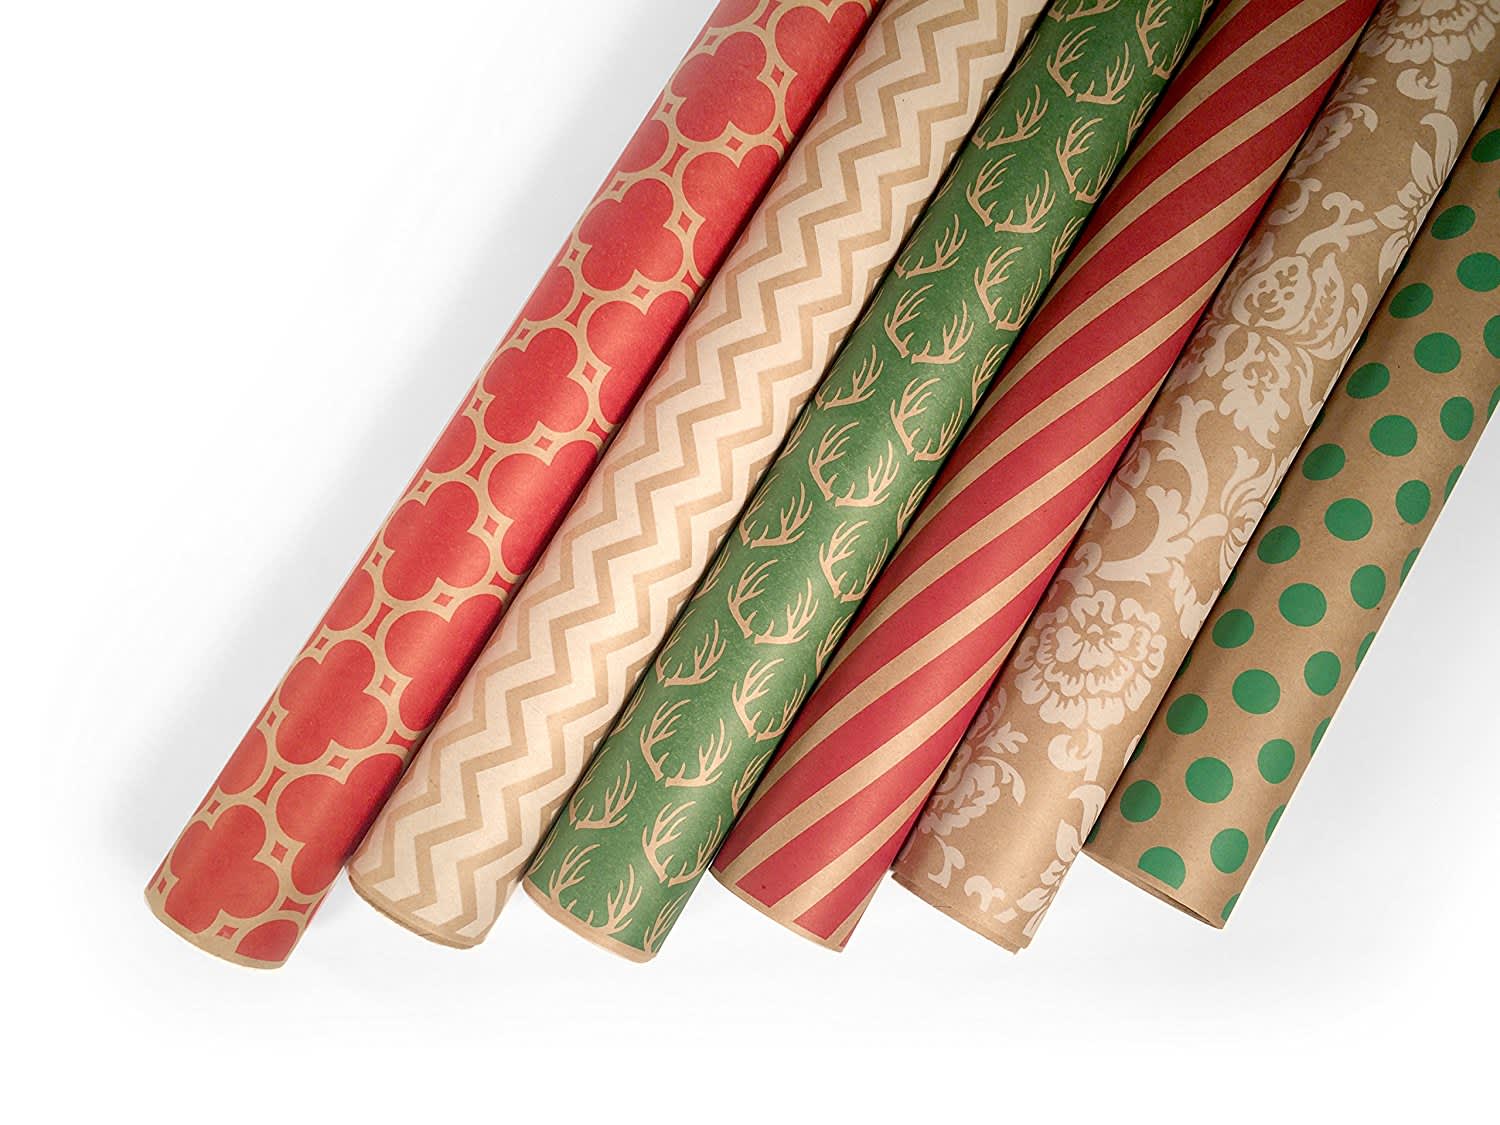 Cheap(ish) Wrapping Paper that Looks Expensive